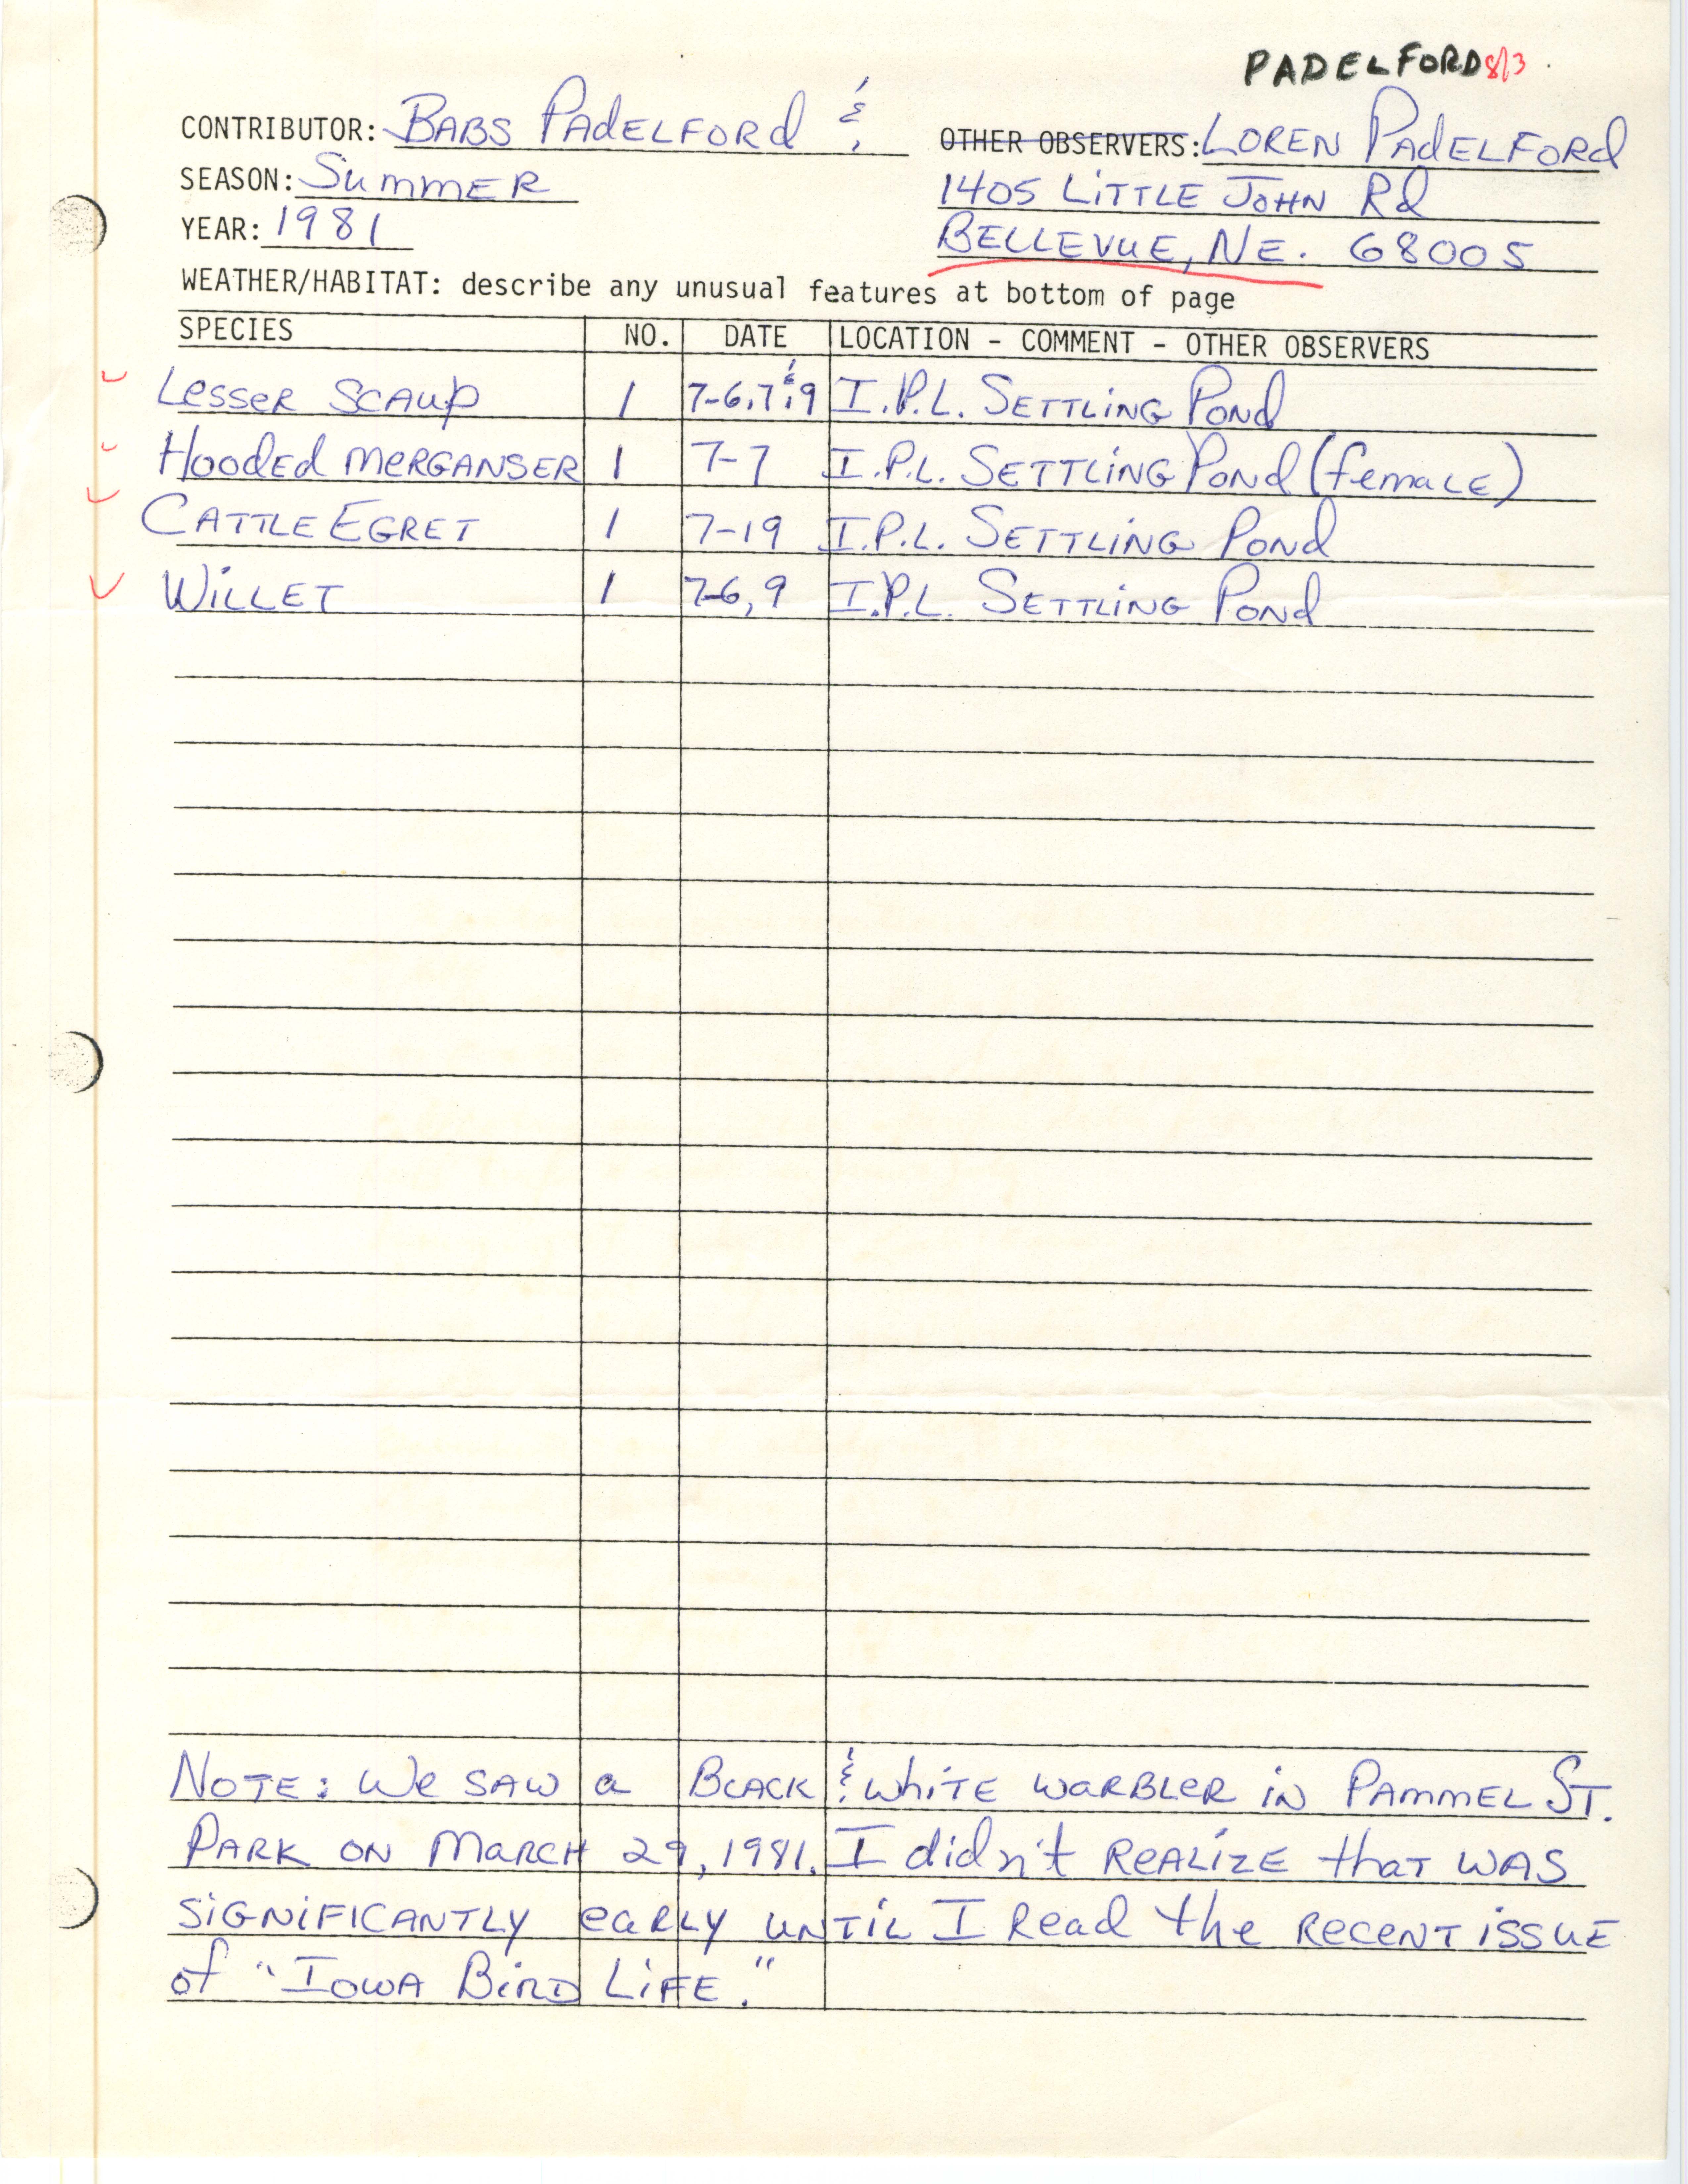 Field notes contributed by Babs Padelford and Loren Padelford, summer 1981